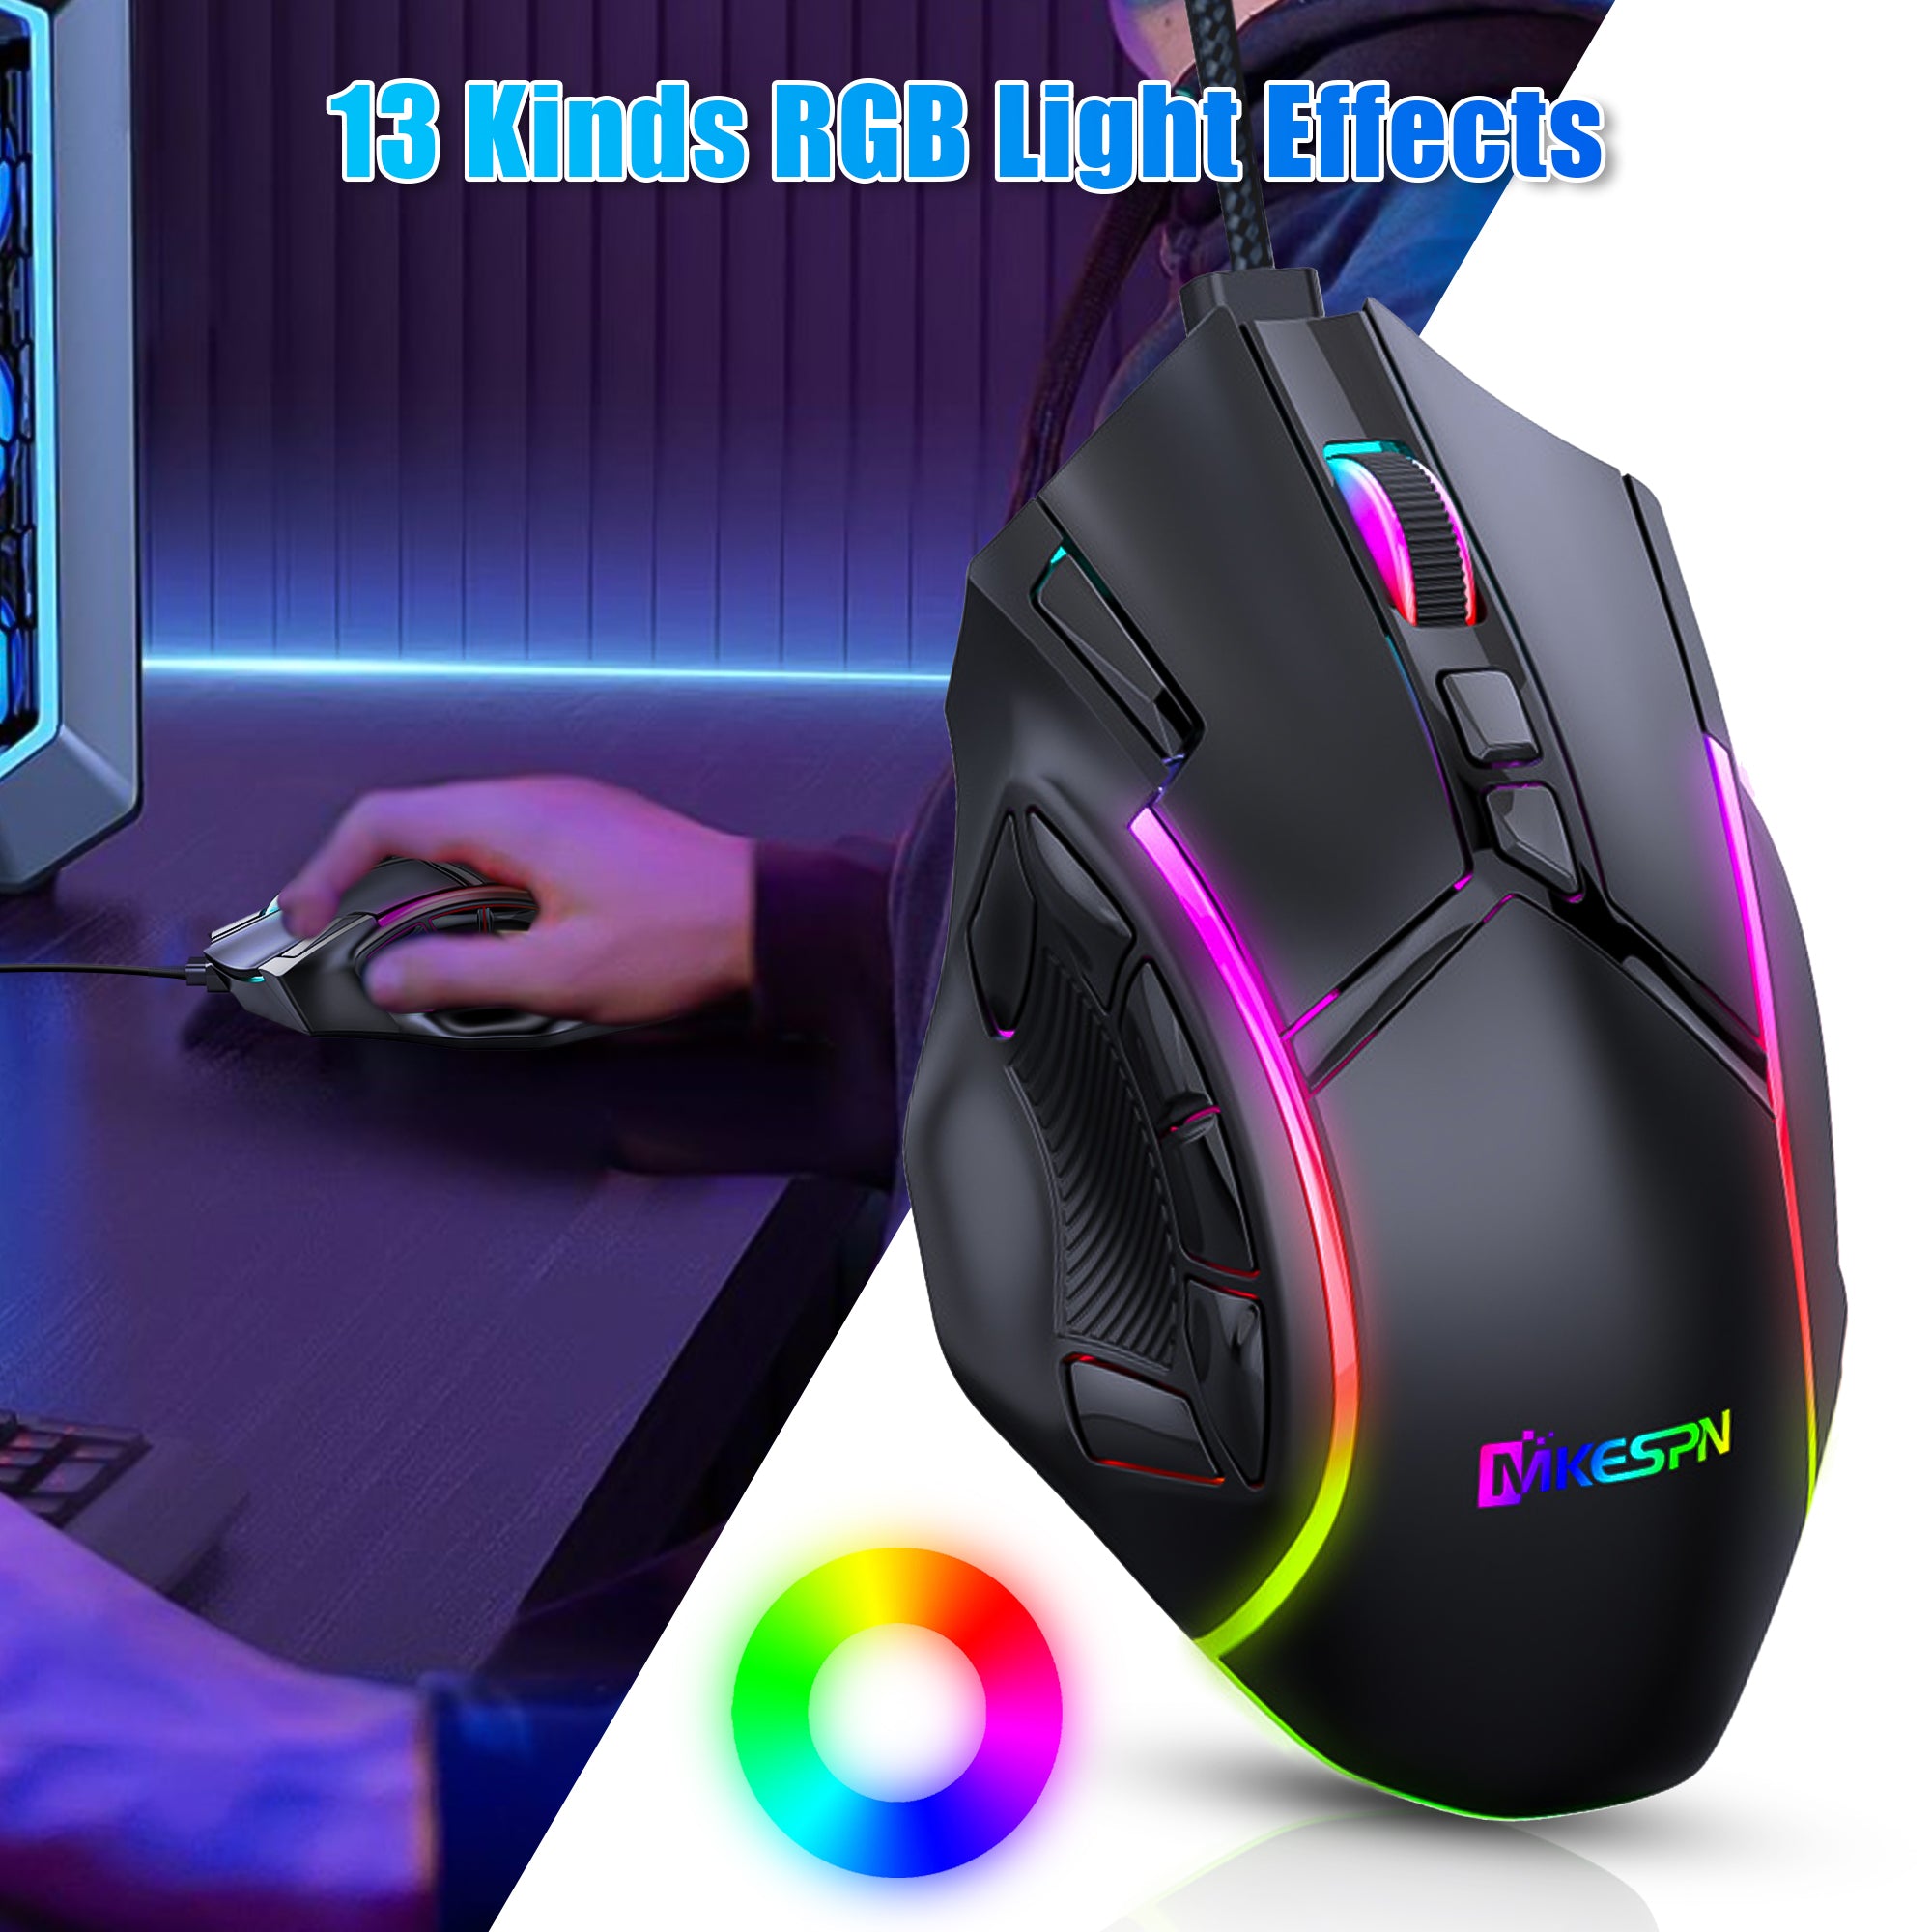 RGB USB Wired 12 Programmable Buttons Gaming Mouse - Computer/PC Mice with Up to 12800 DPI 6 Adjustable DPI with 13 RGB Light Modes (Black)